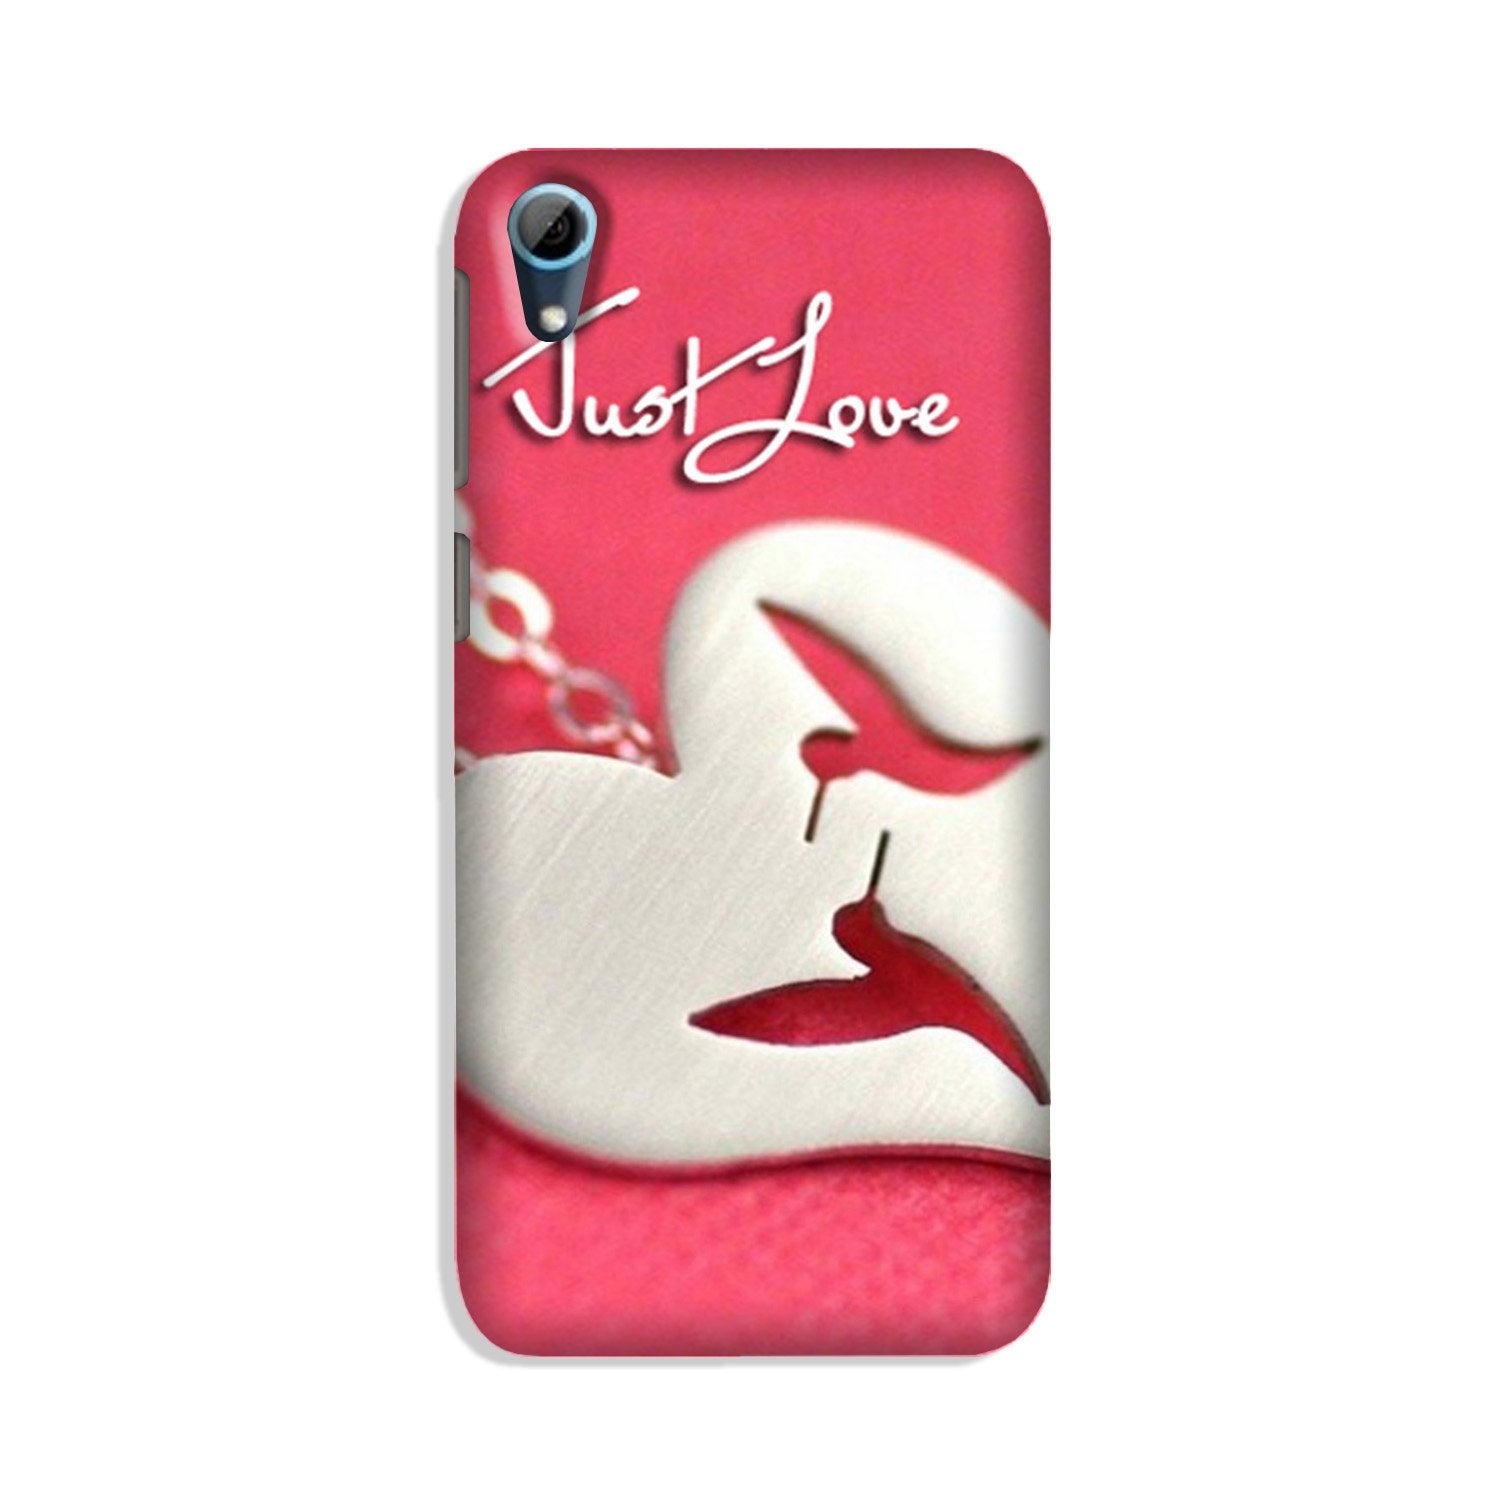 Just love Case for HTC Desire 826